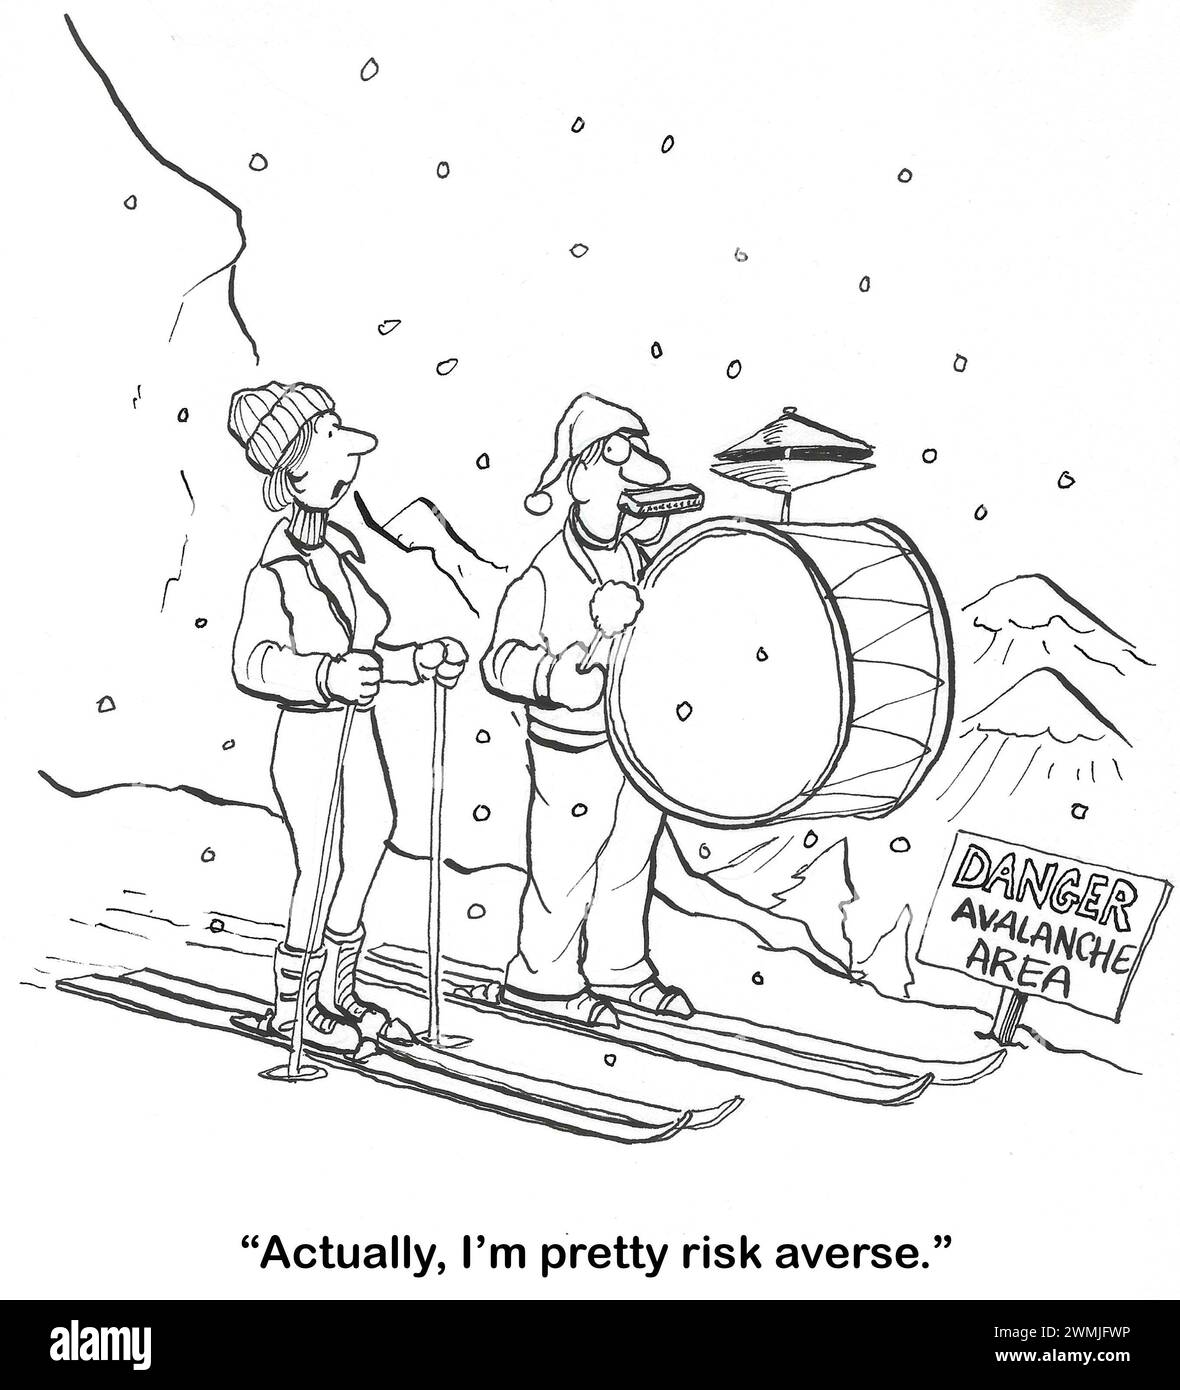 BW cartoon of two people skiing - both are in an avalanche area.  One is risk averse, the other is a loud, one-man band. Stock Photo